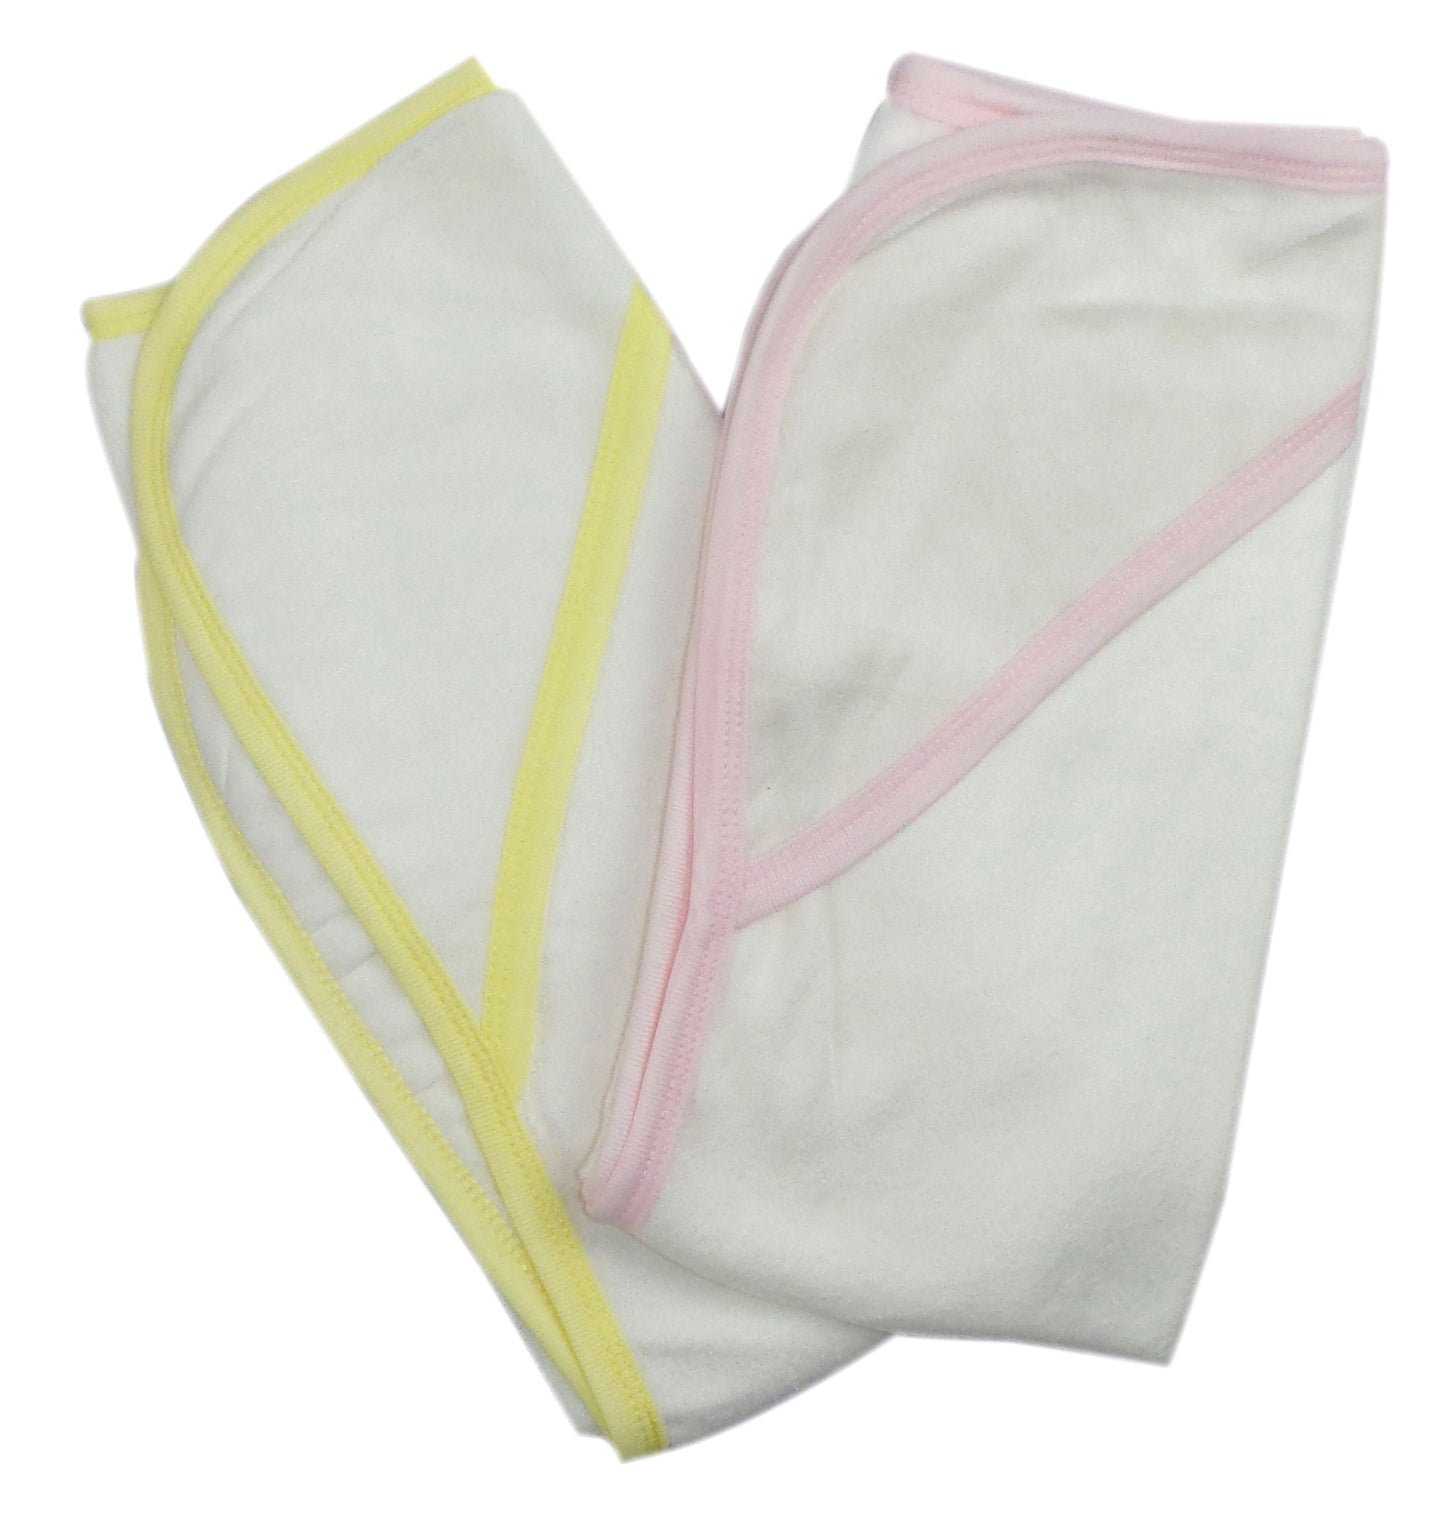 Infant Hooded Bath Towel (Pack of 2) 021B-Pink-021B-Yellow